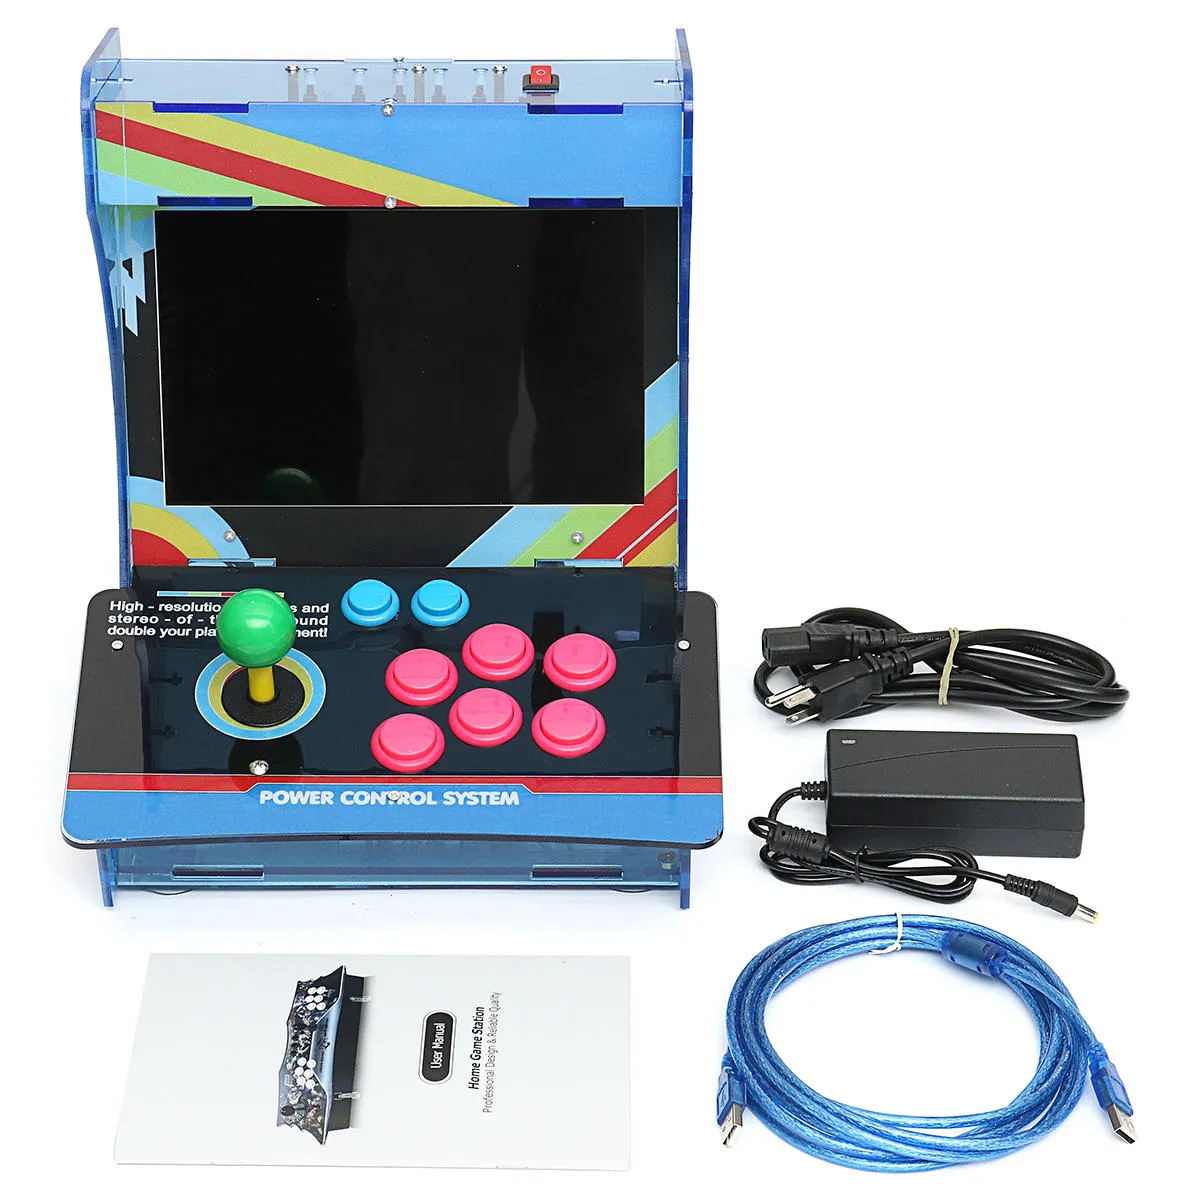 PandoraBox 5S 1299 in 1 Single Player Joystick Arcade Game Console with Display Screen